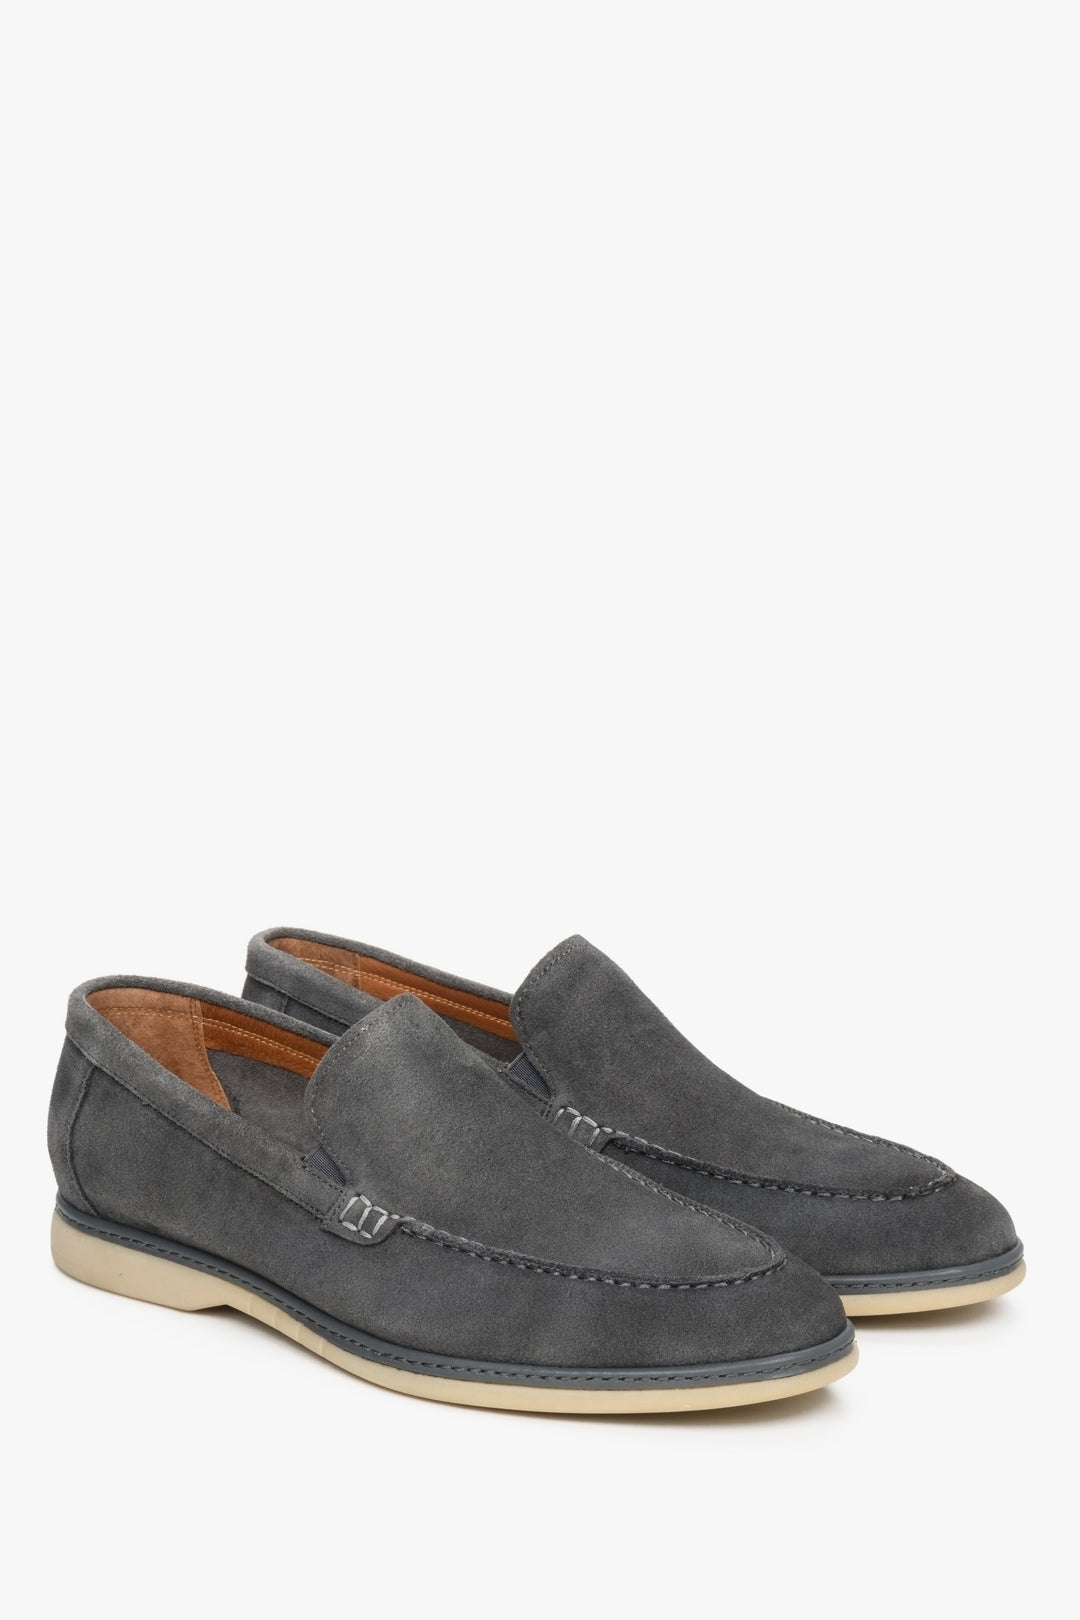 Men's grey loafers made of genuine velour for fall by Estro.